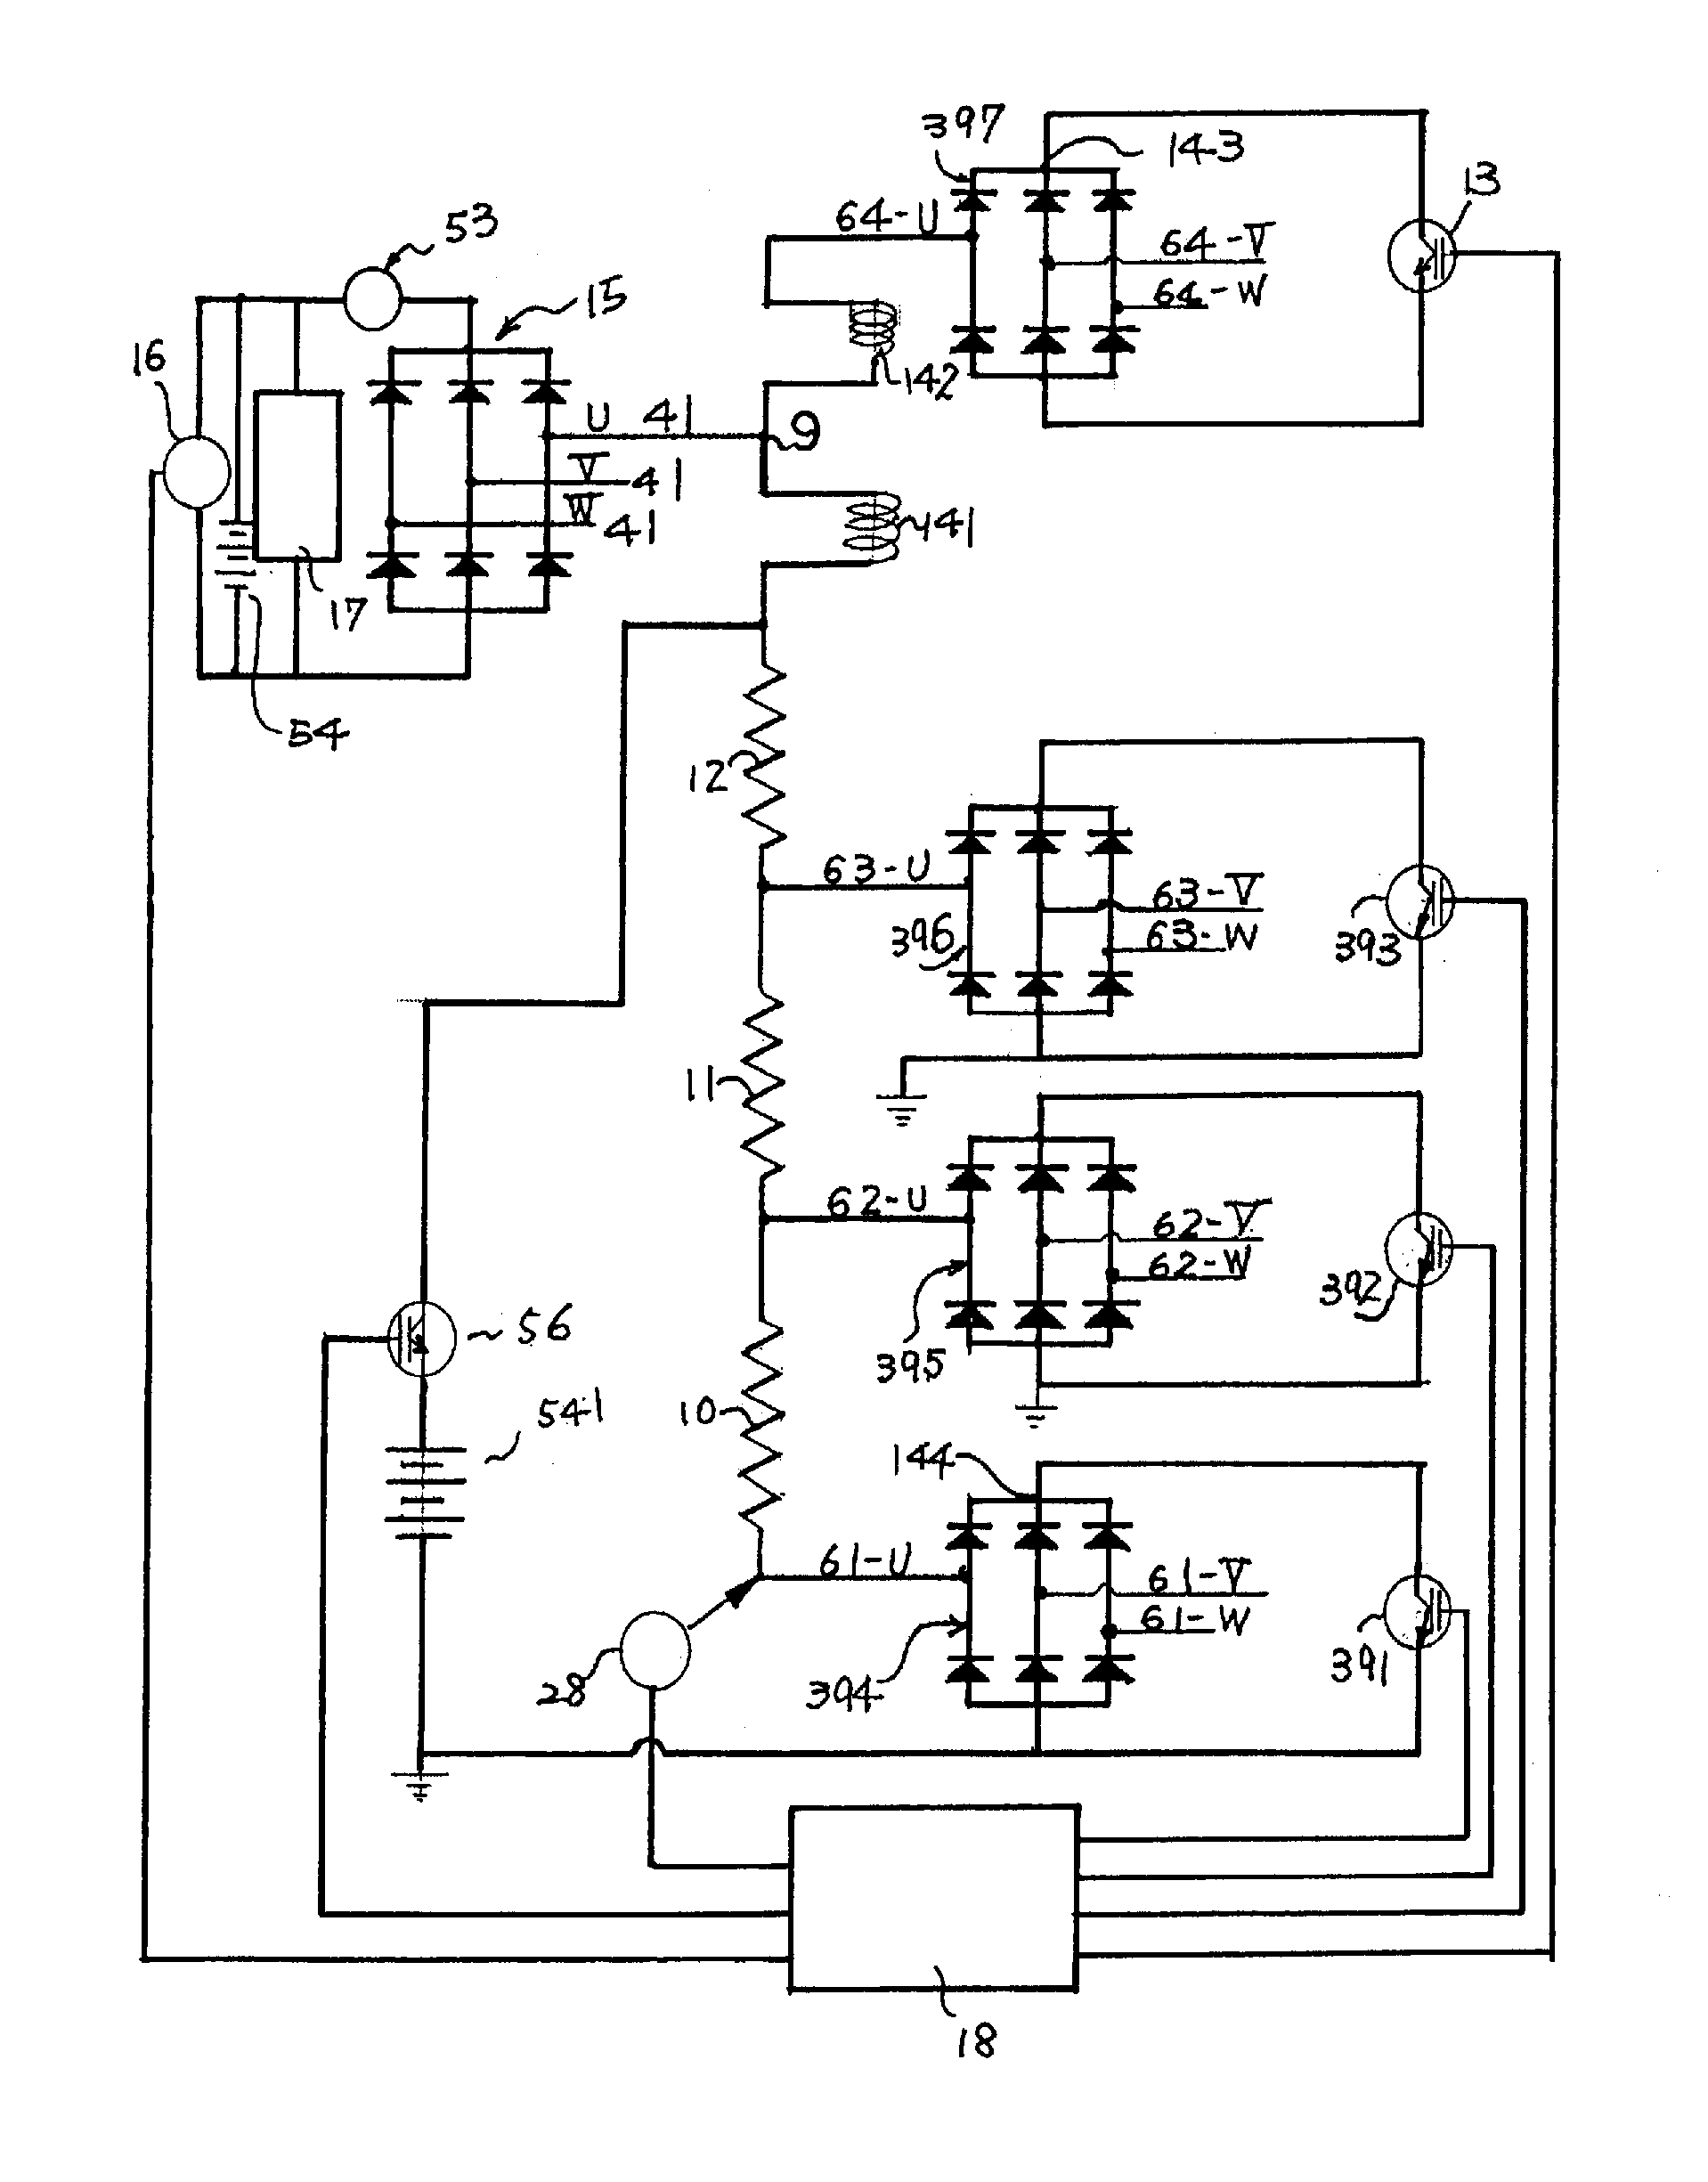 Controller and systems of permanent magnet alternator and motor